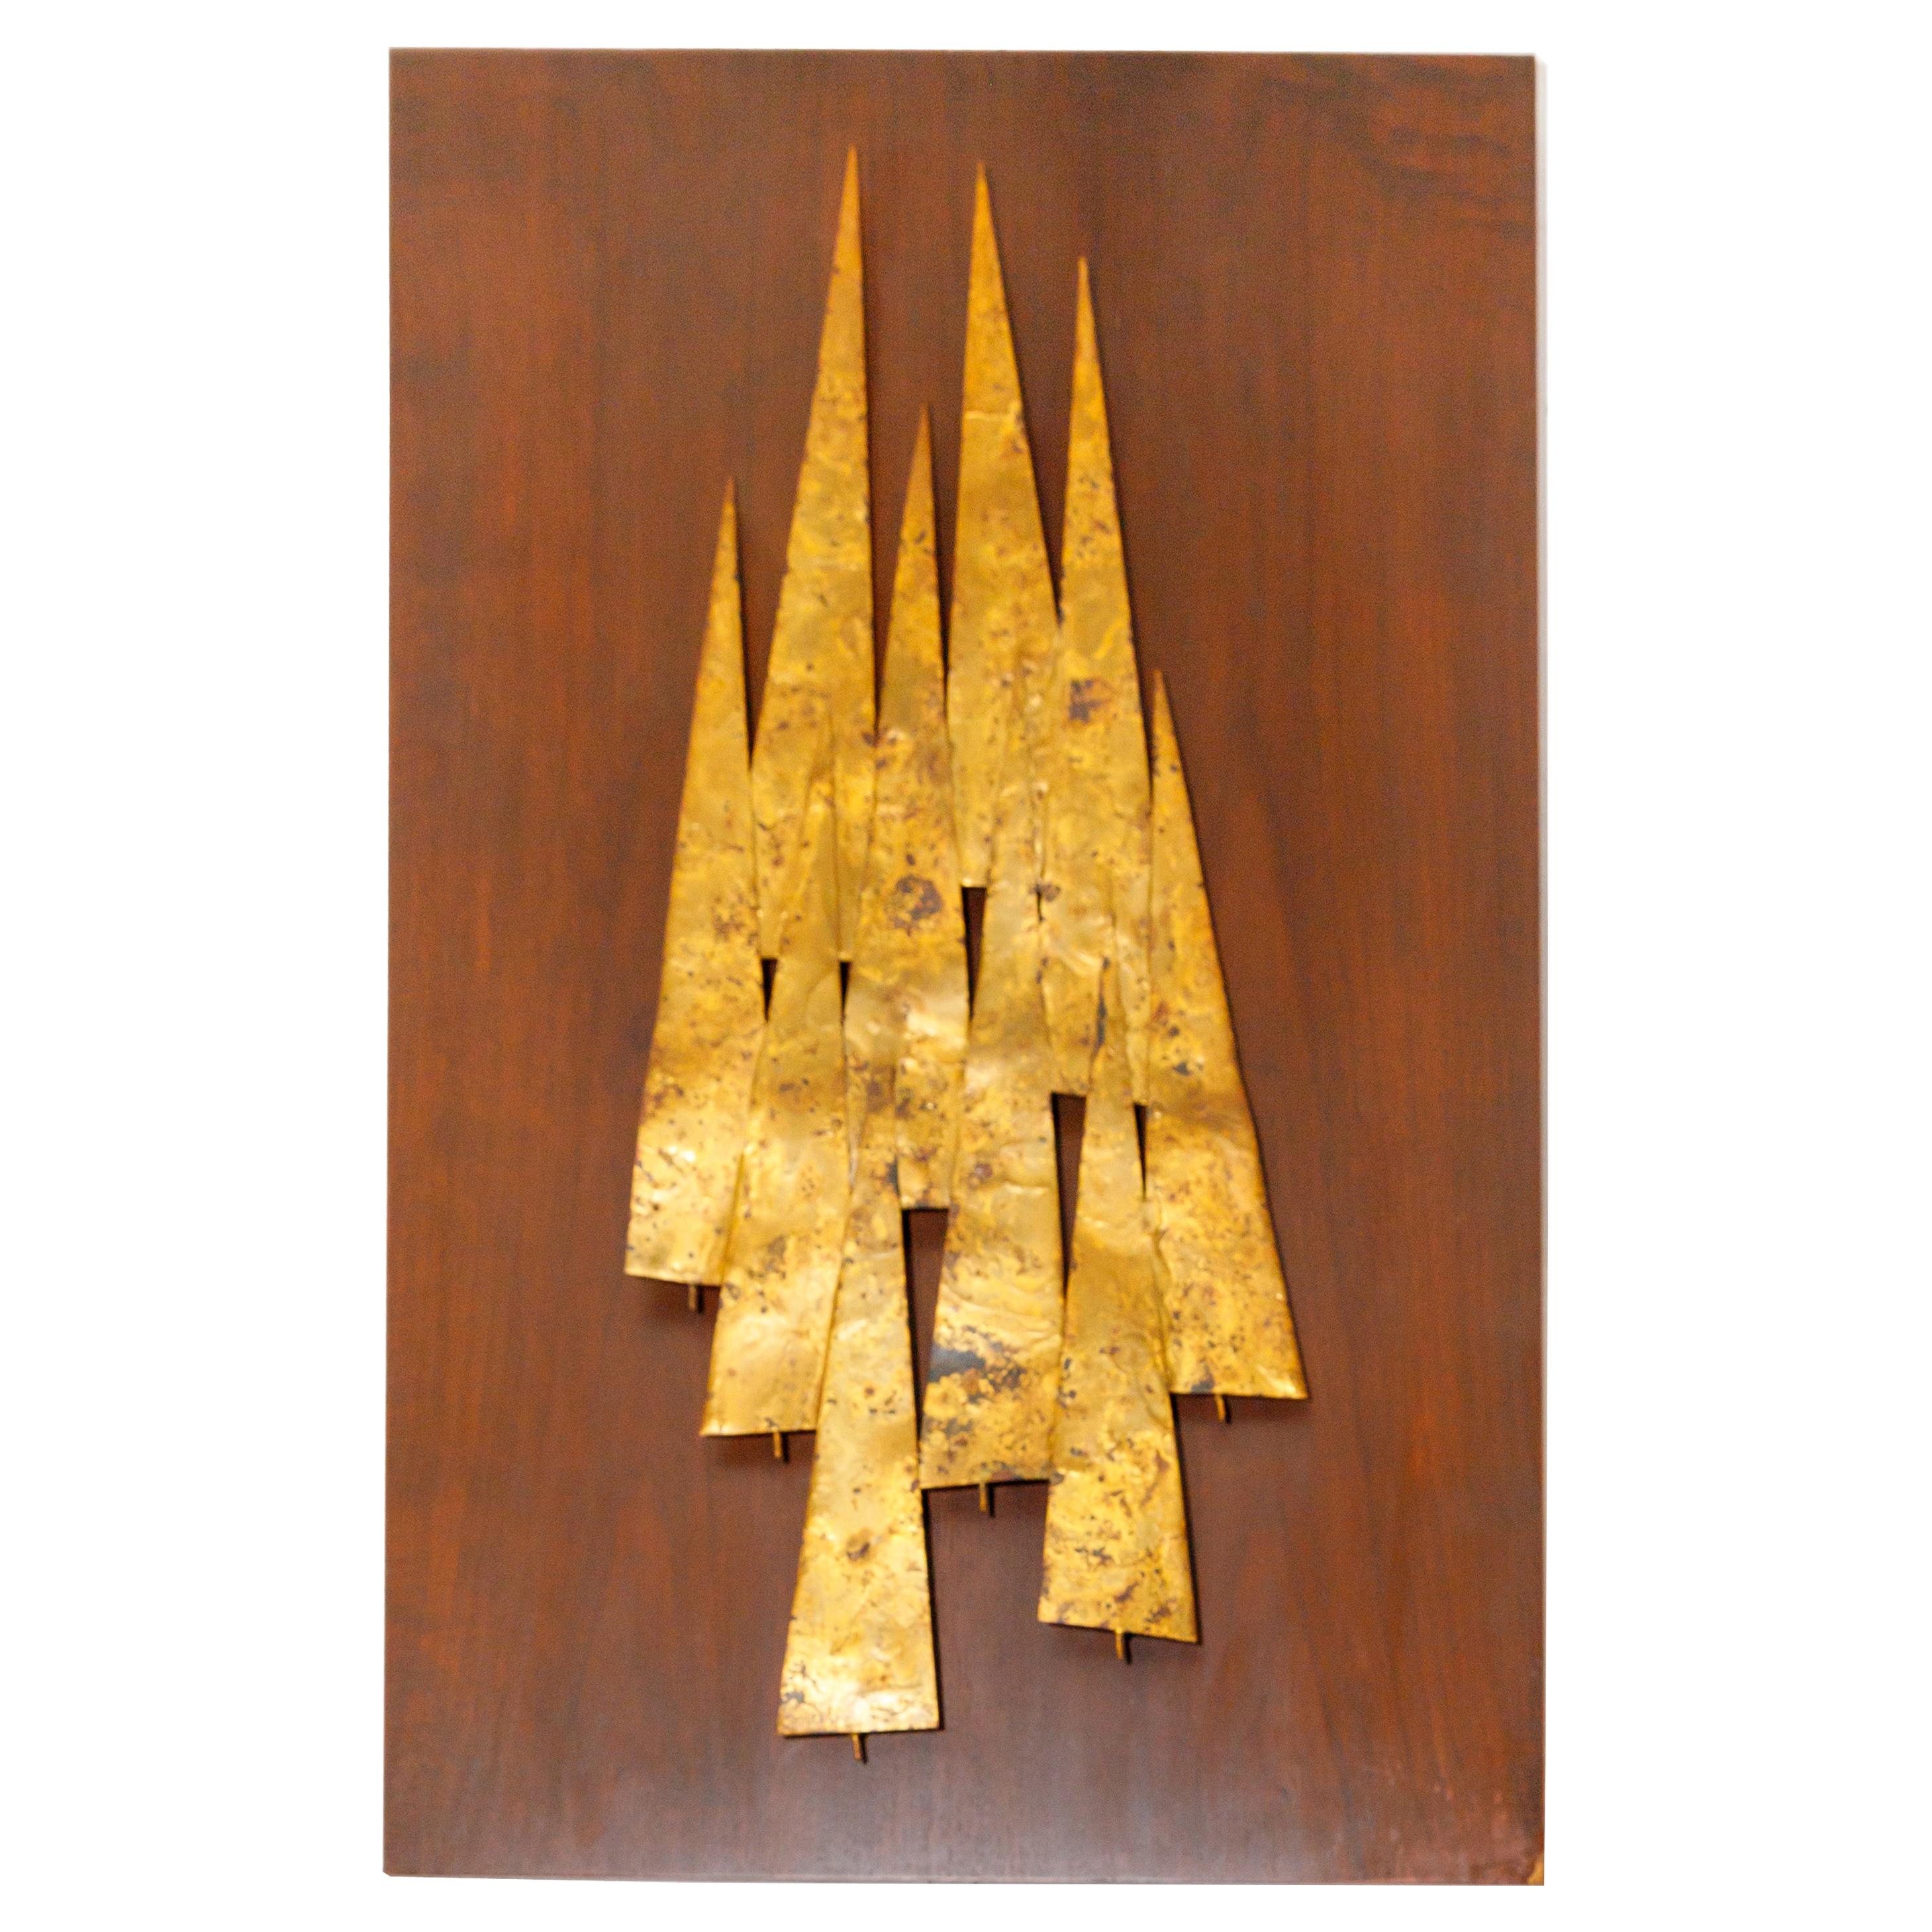 Metal Tree Form Sculpture Mounted on Walnut Plank For Sale